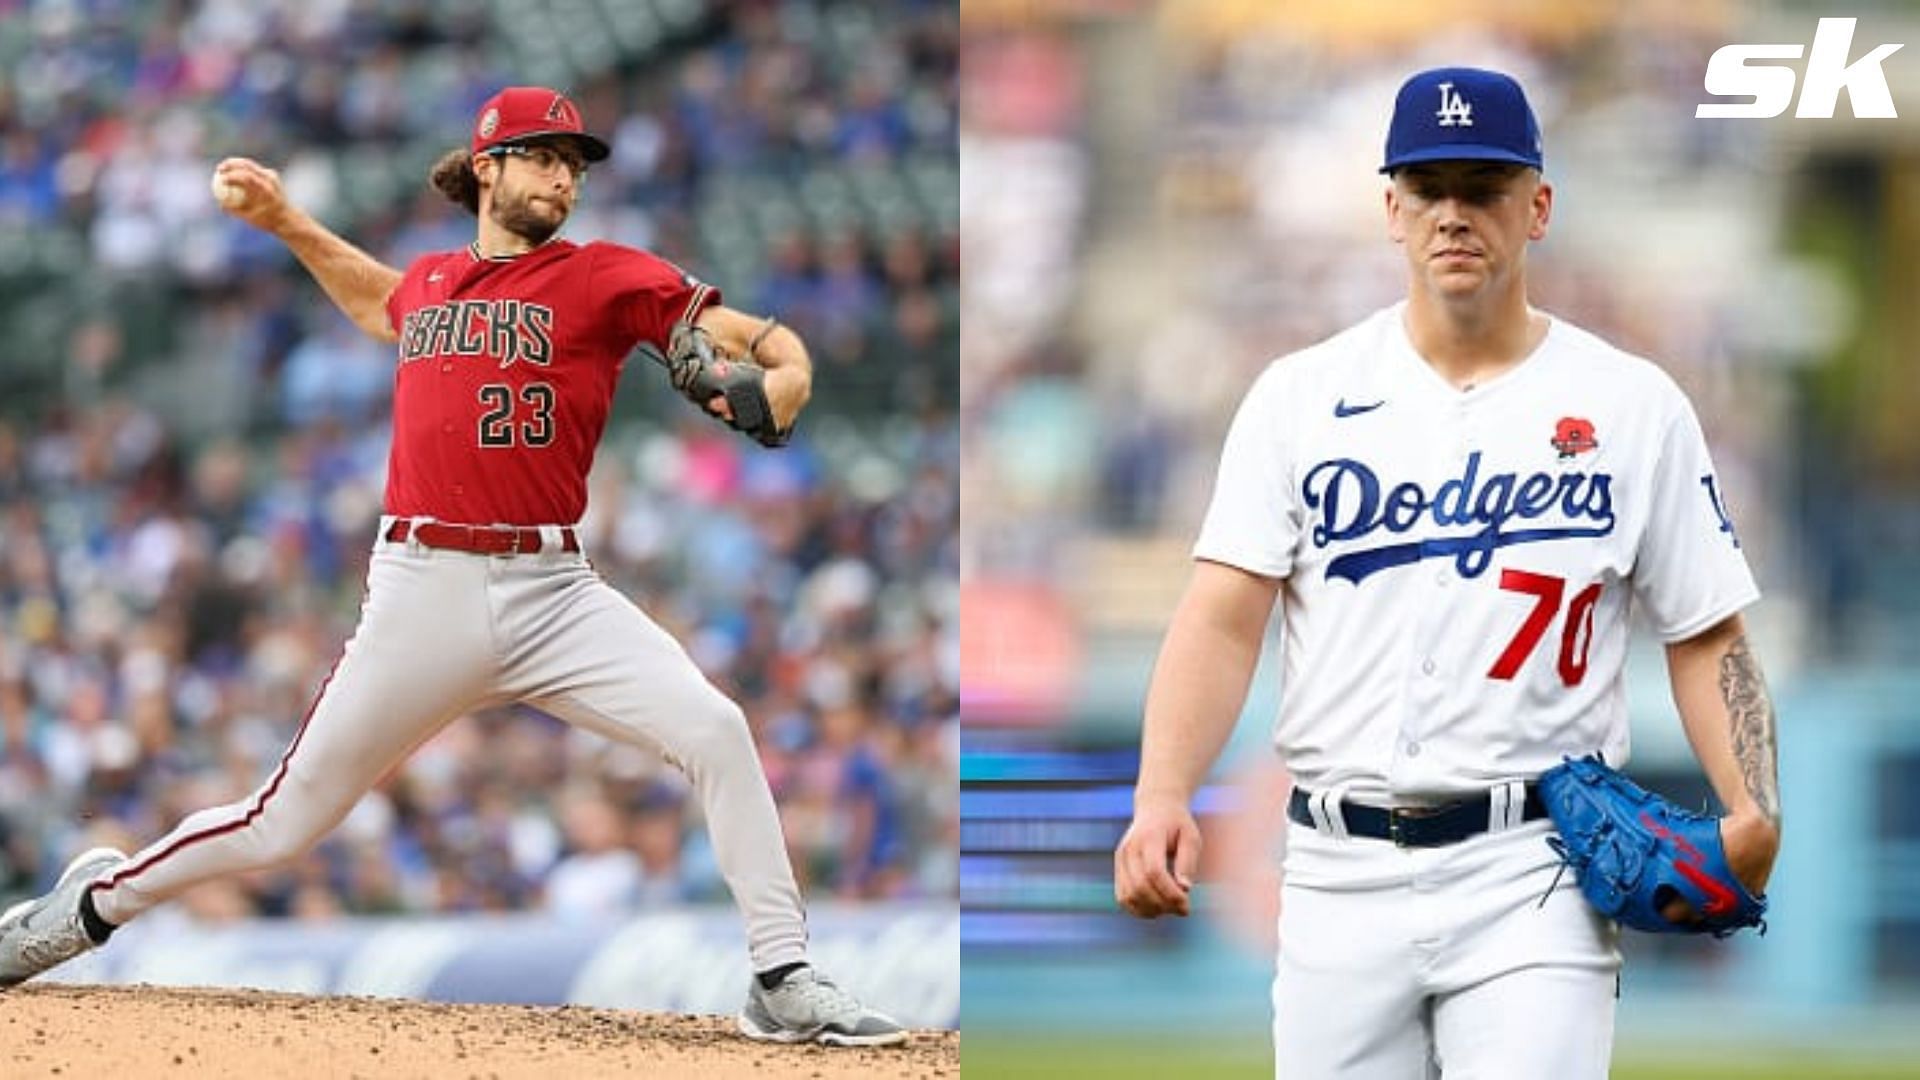 Dodgers vs. Red Sox schedule, TV, game times, starting pitchers